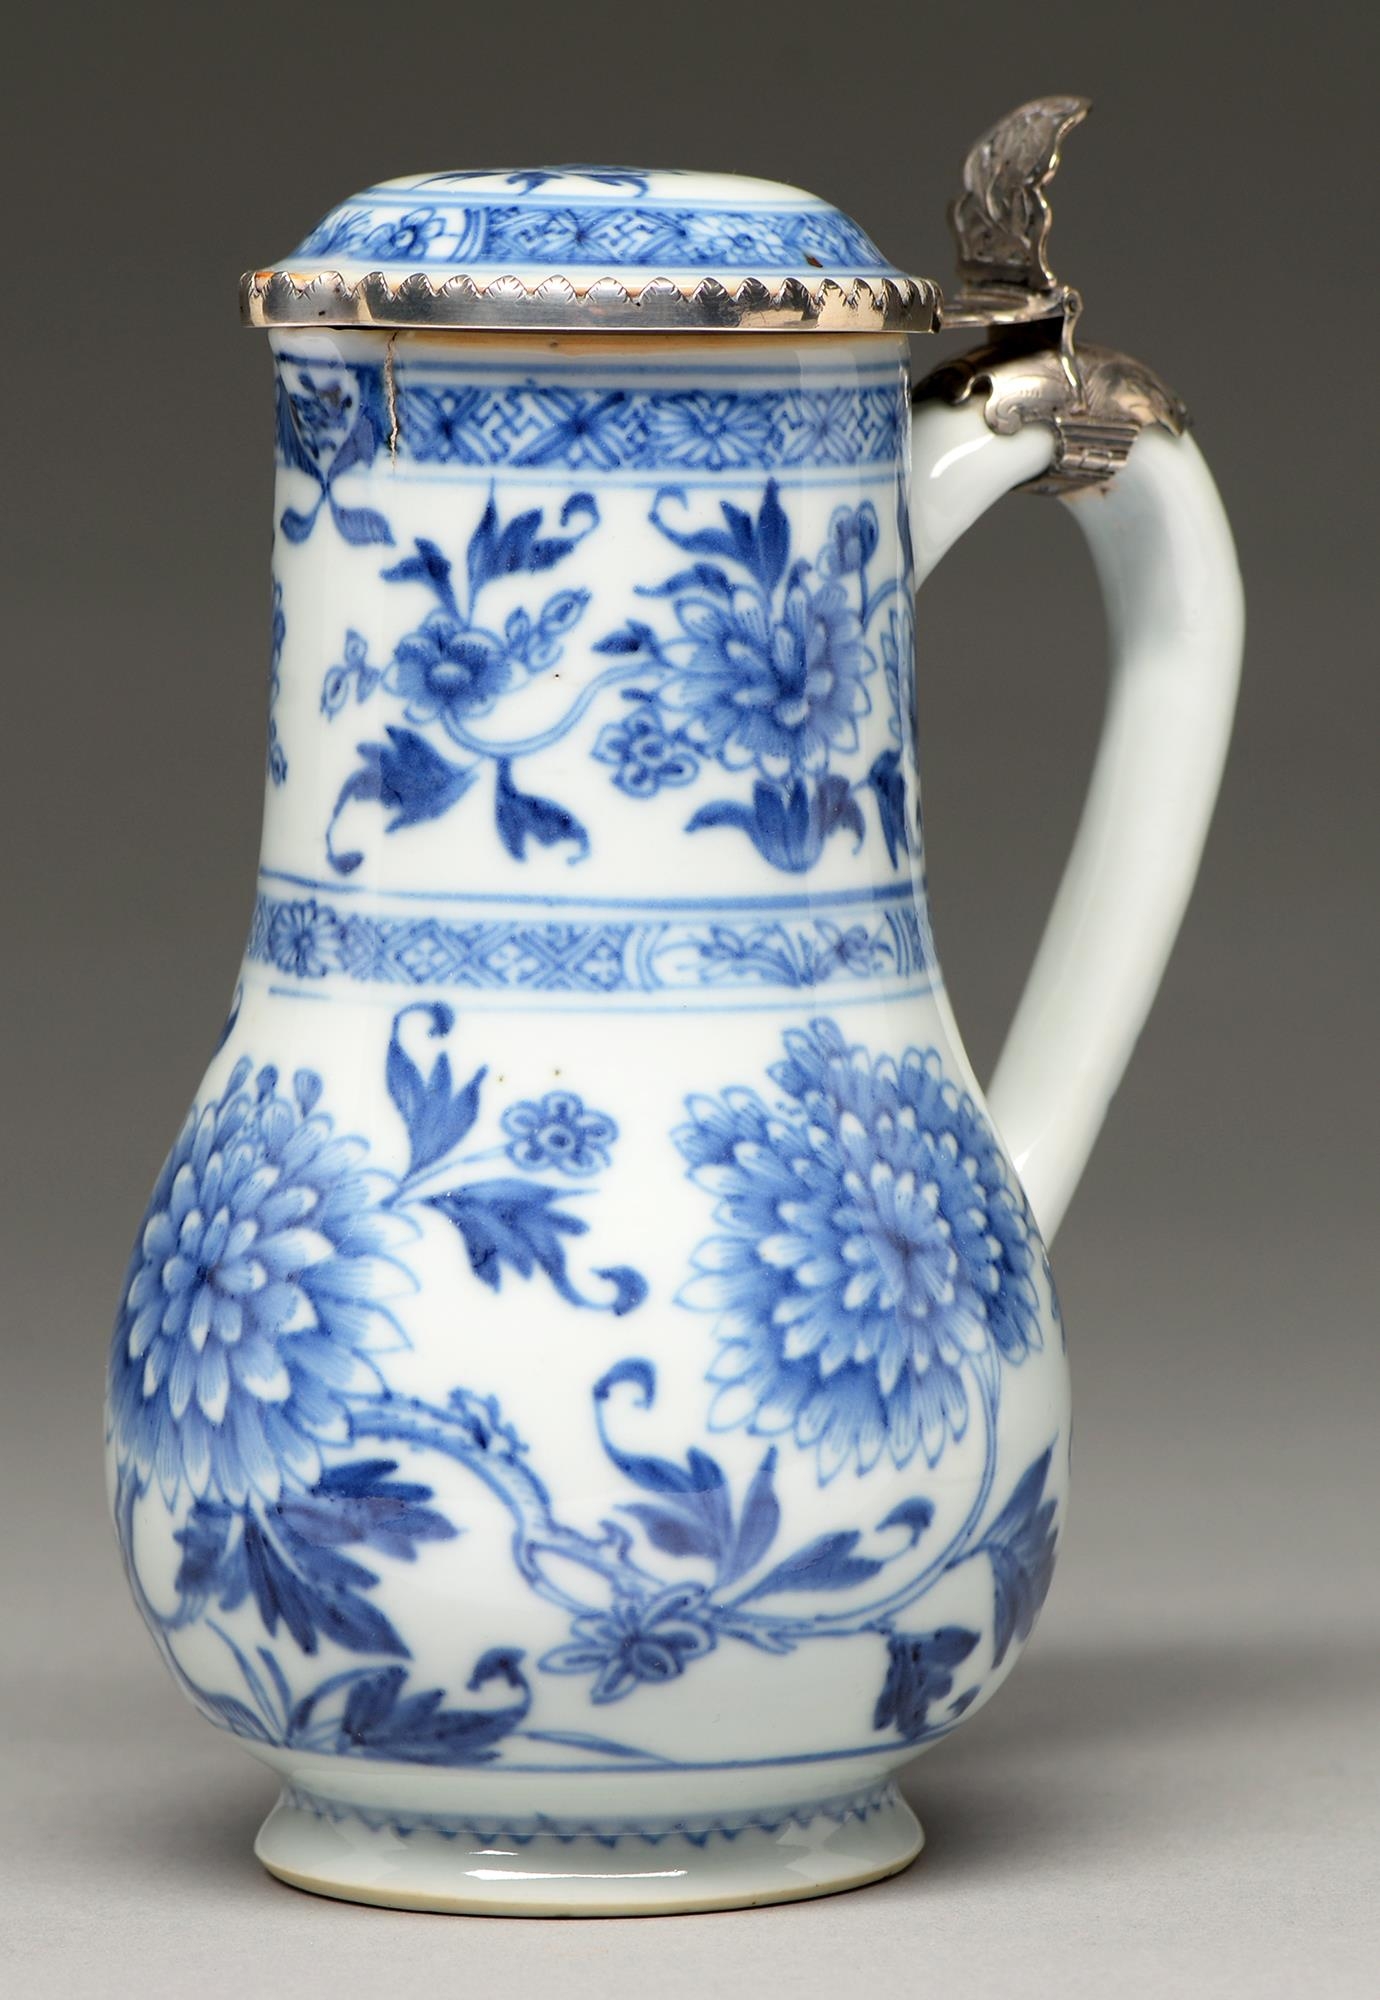 A Chinese blue and white jug, 18th c, painted in two registers with peonies between diaper